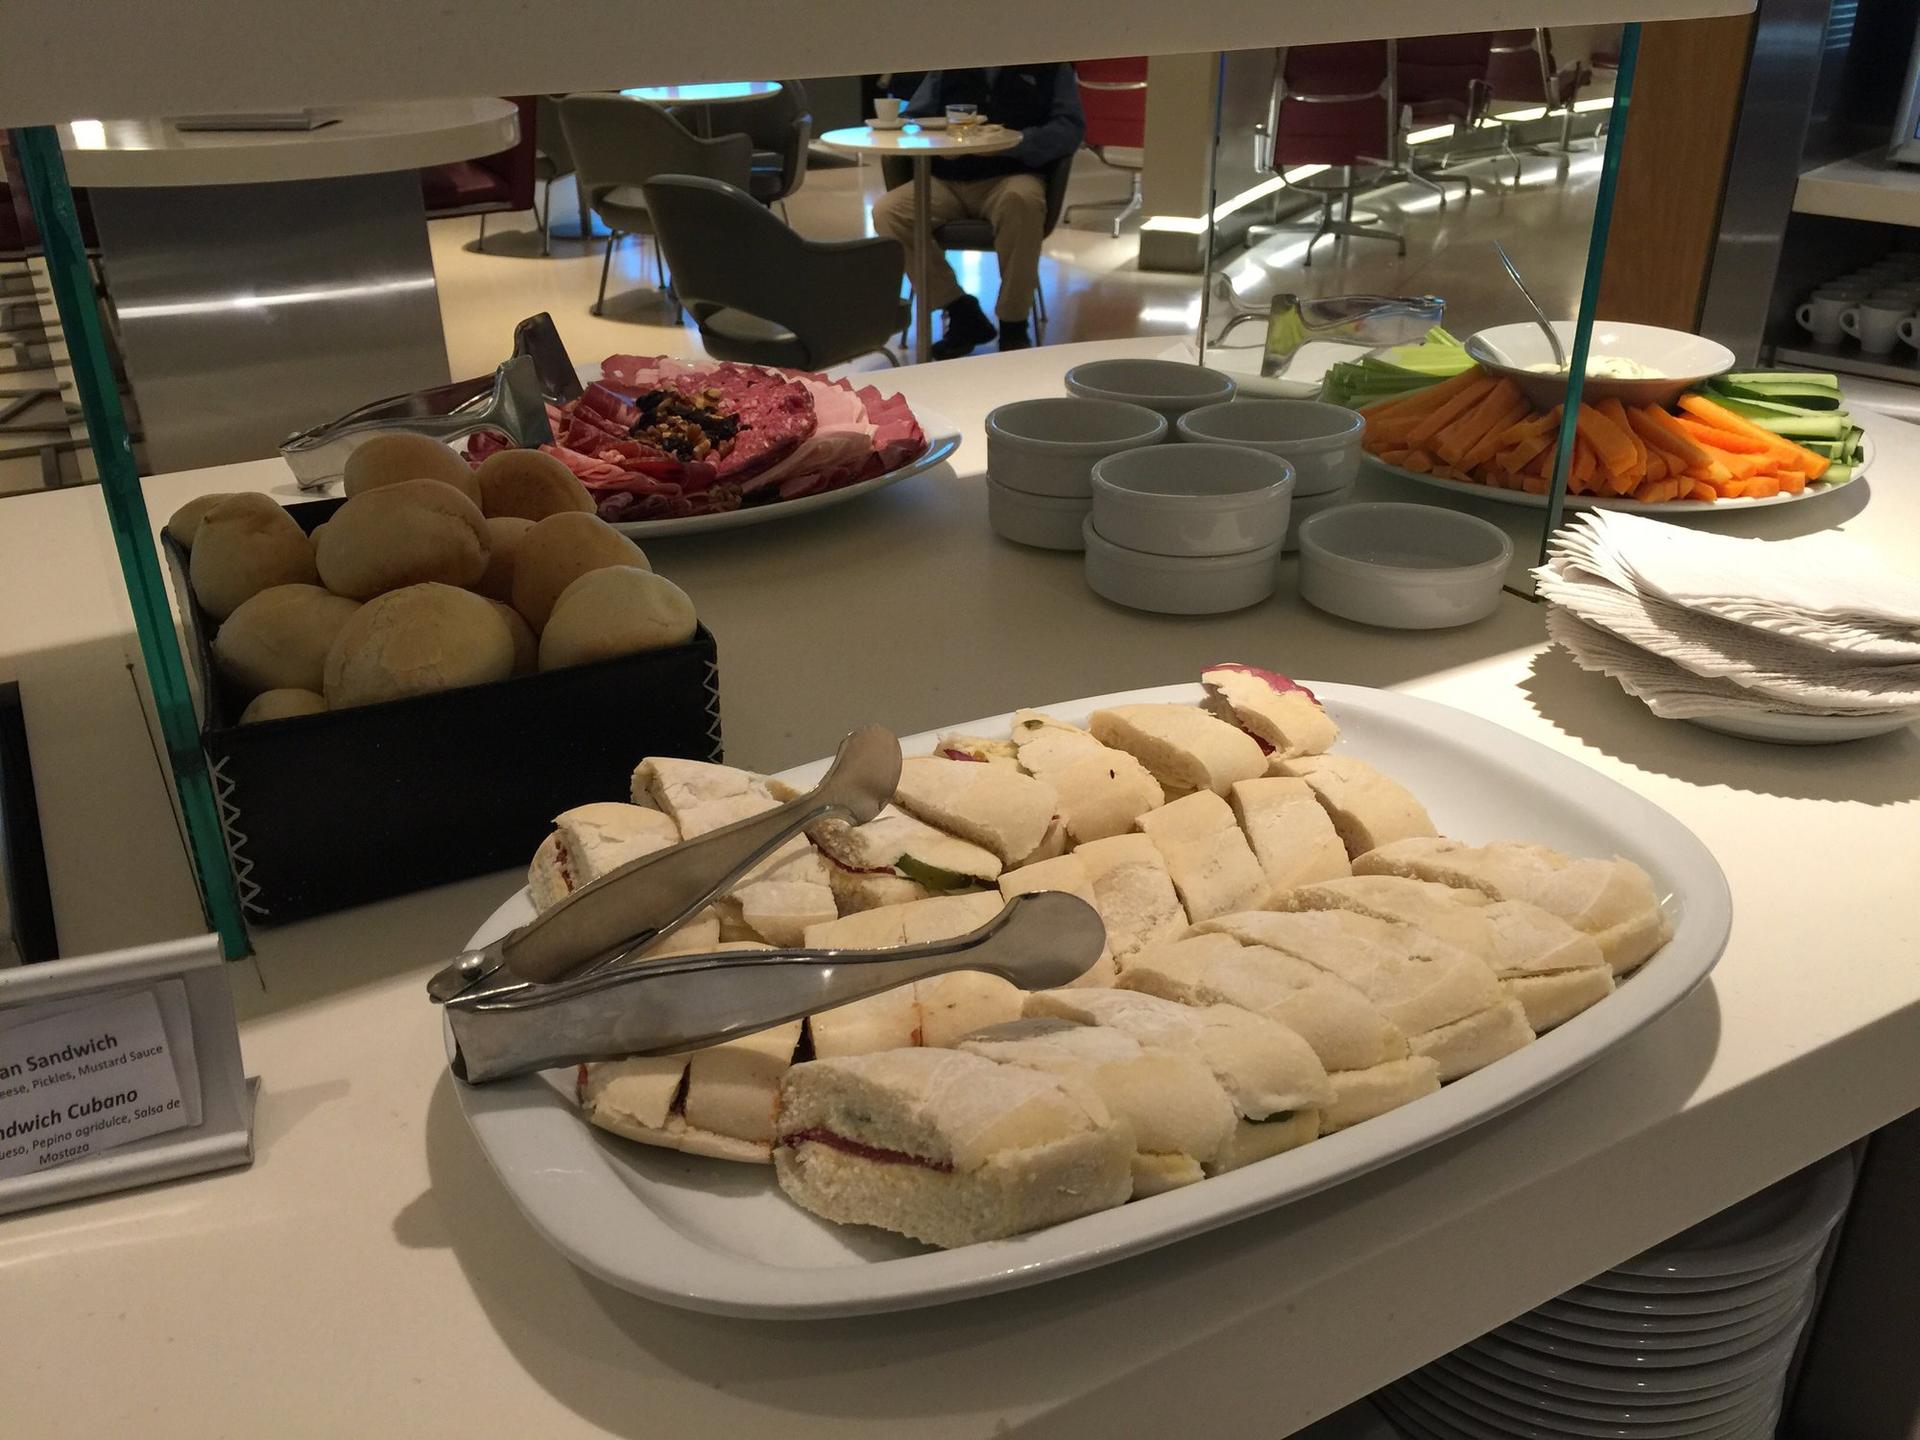 American Airlines Admirals Club & Iberia VIP Lounge image 13 of 18